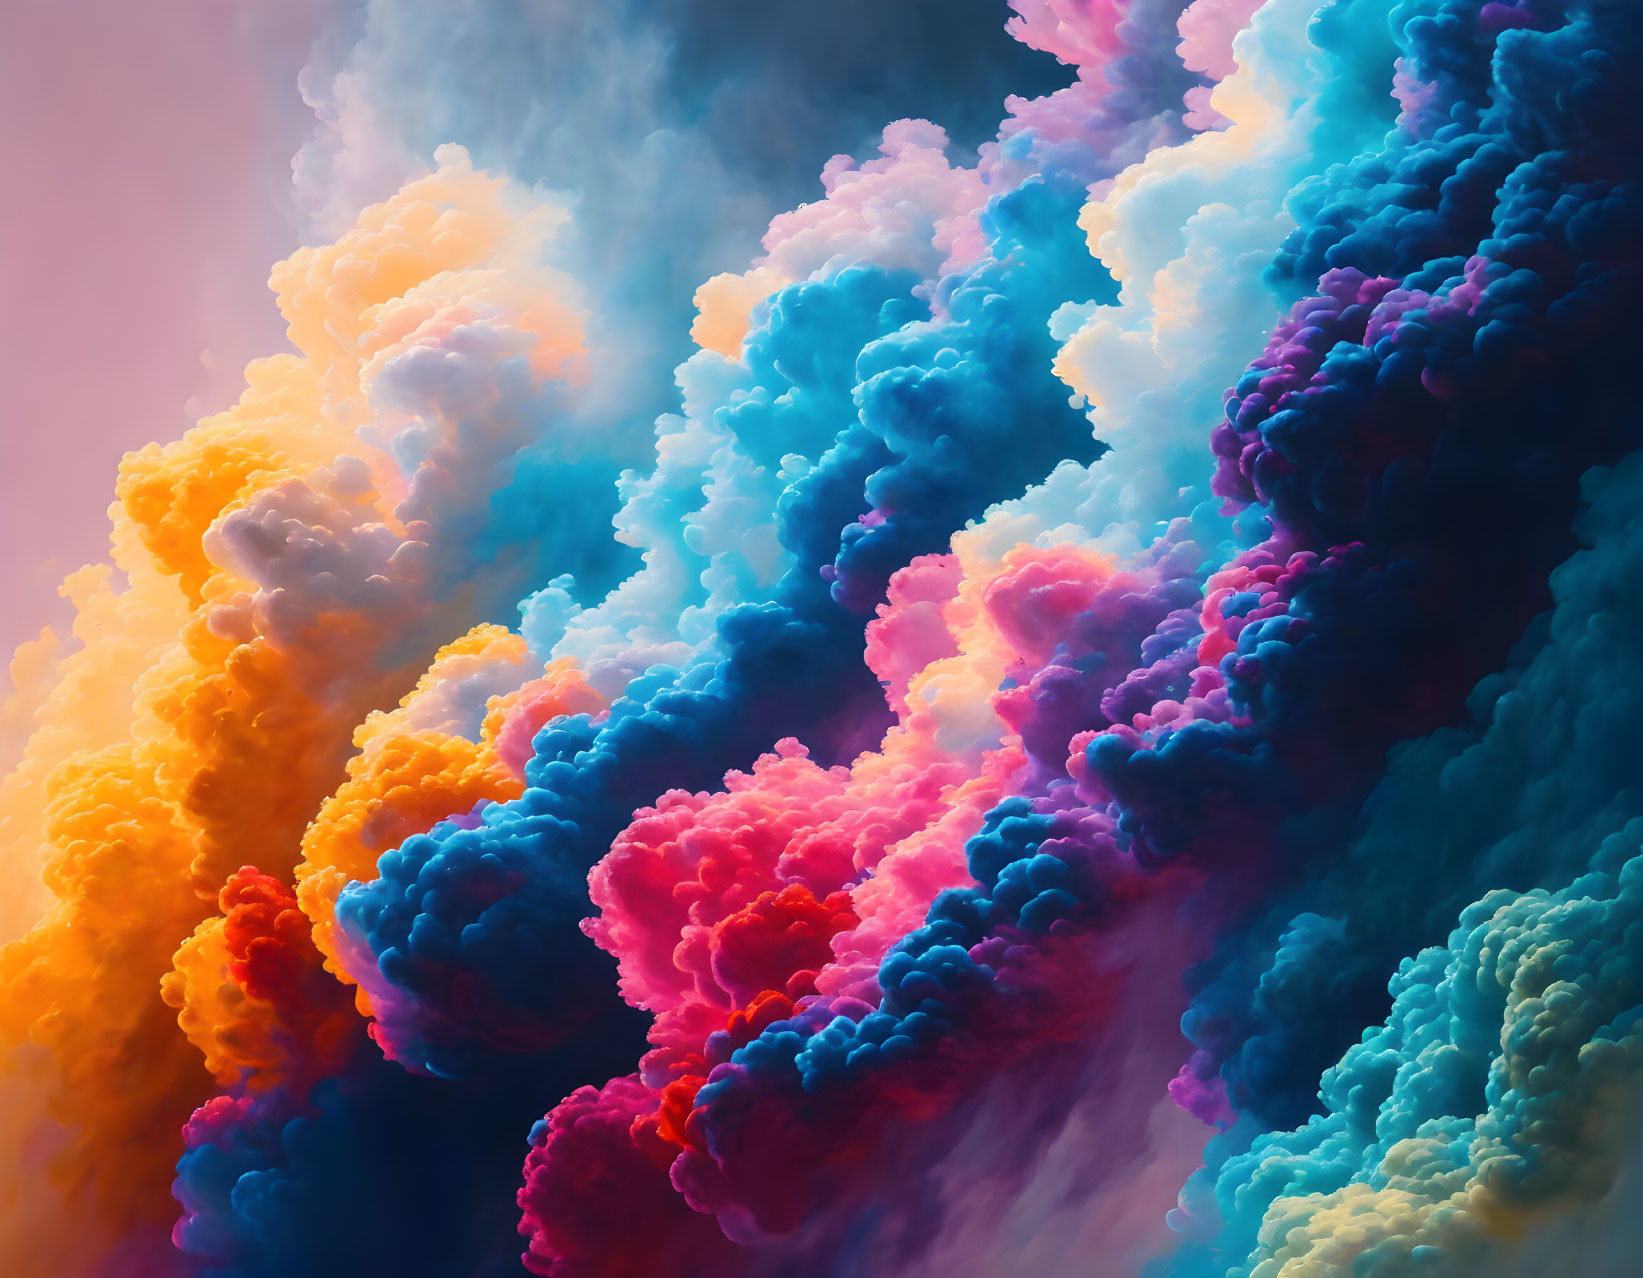 Multicolored Clouds in Pink, Blue, and Orange Hues